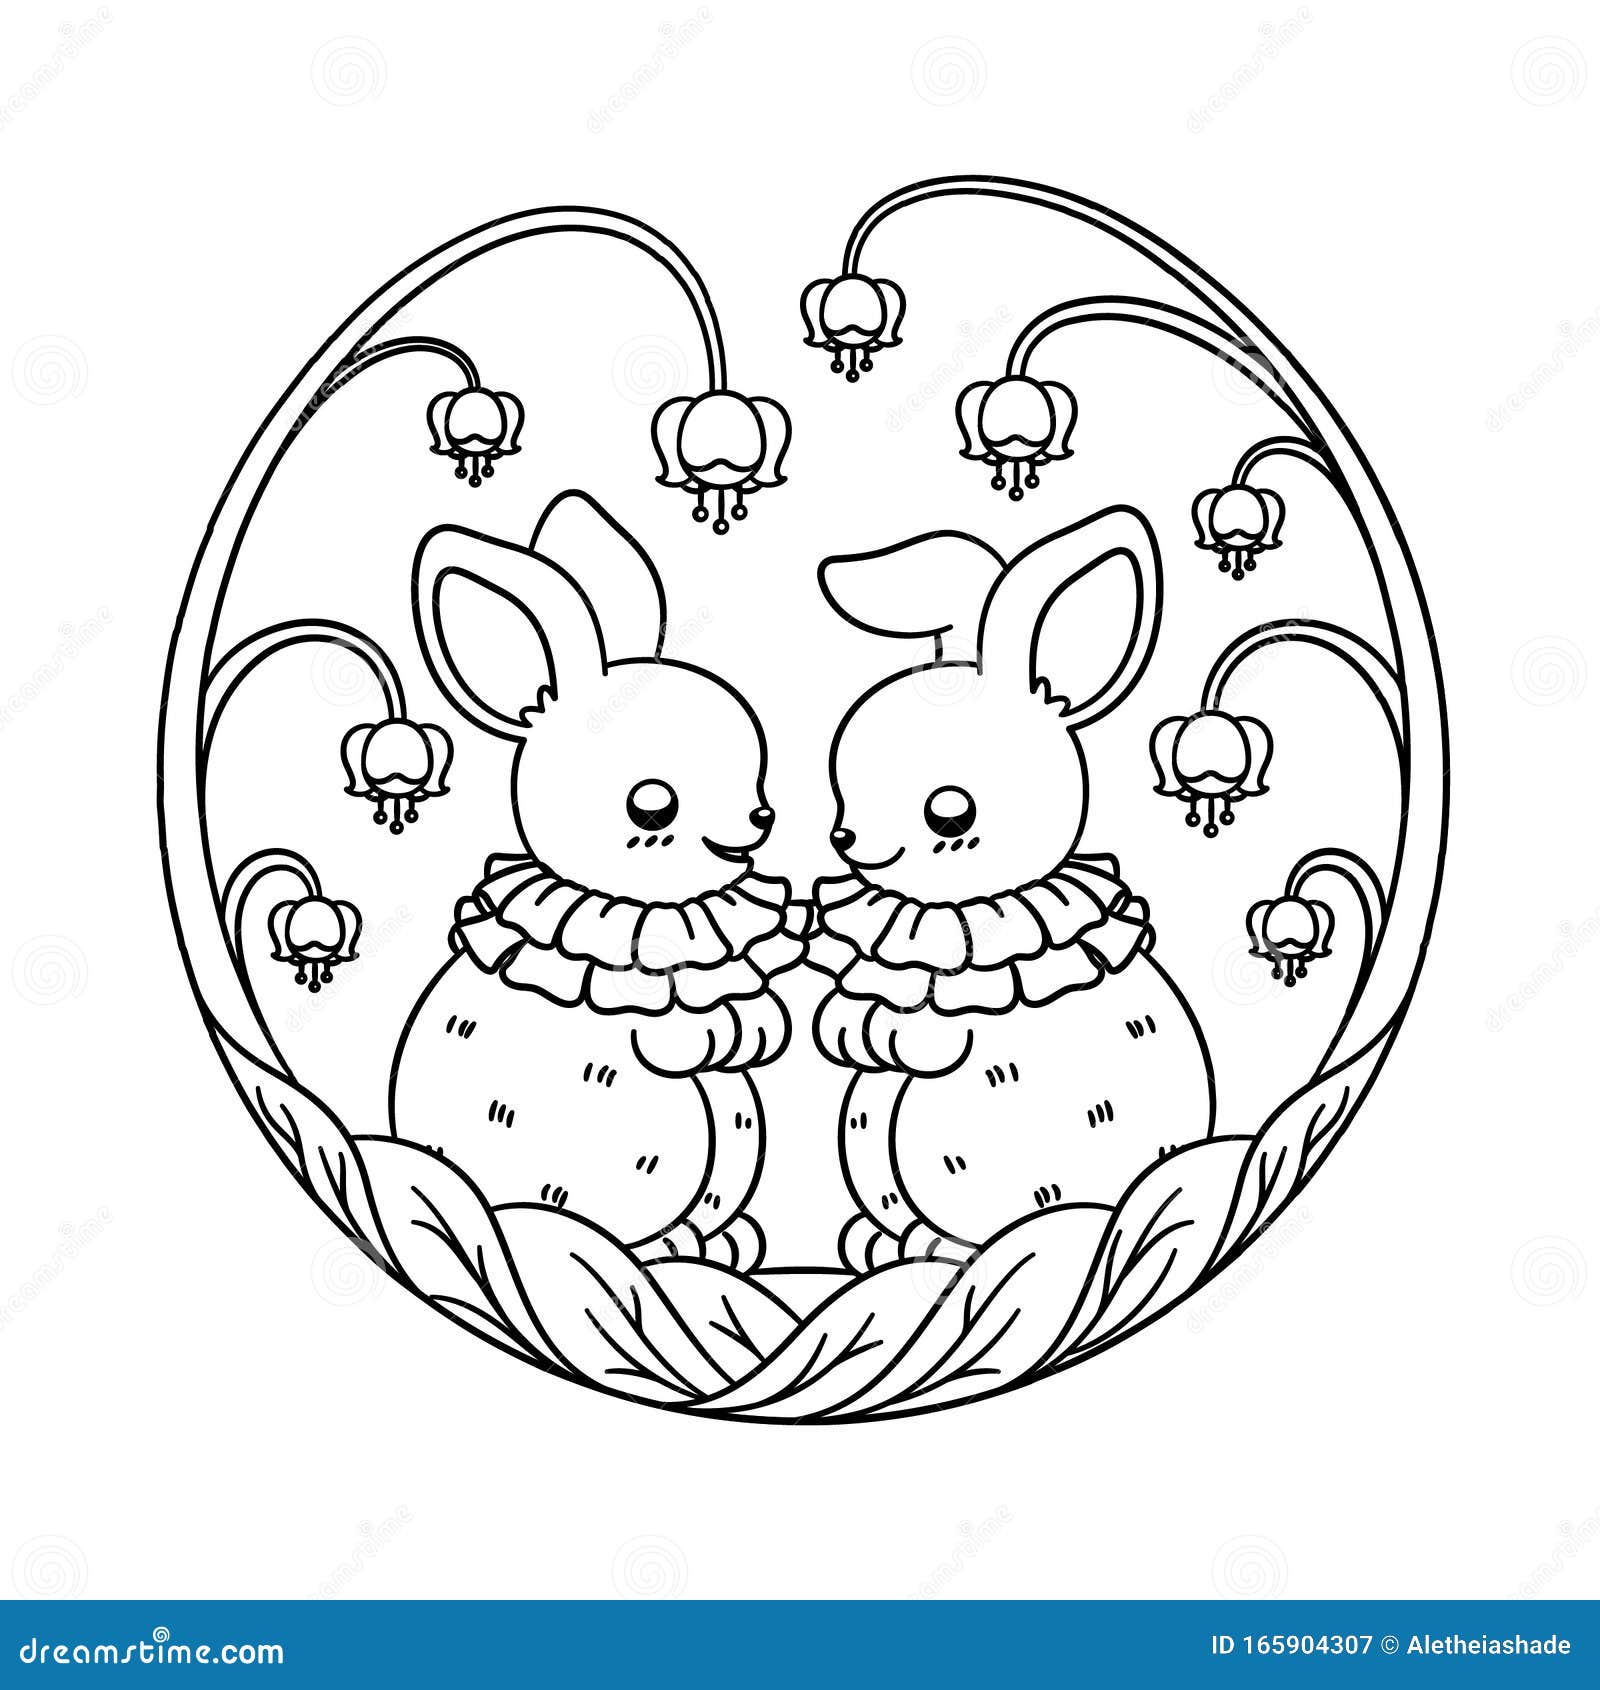 forest fantasy rabbit friends surrounded flowers and leaves vector illustration easter bunny printable coloring book page stock vector illustration of hare abstract 165904307